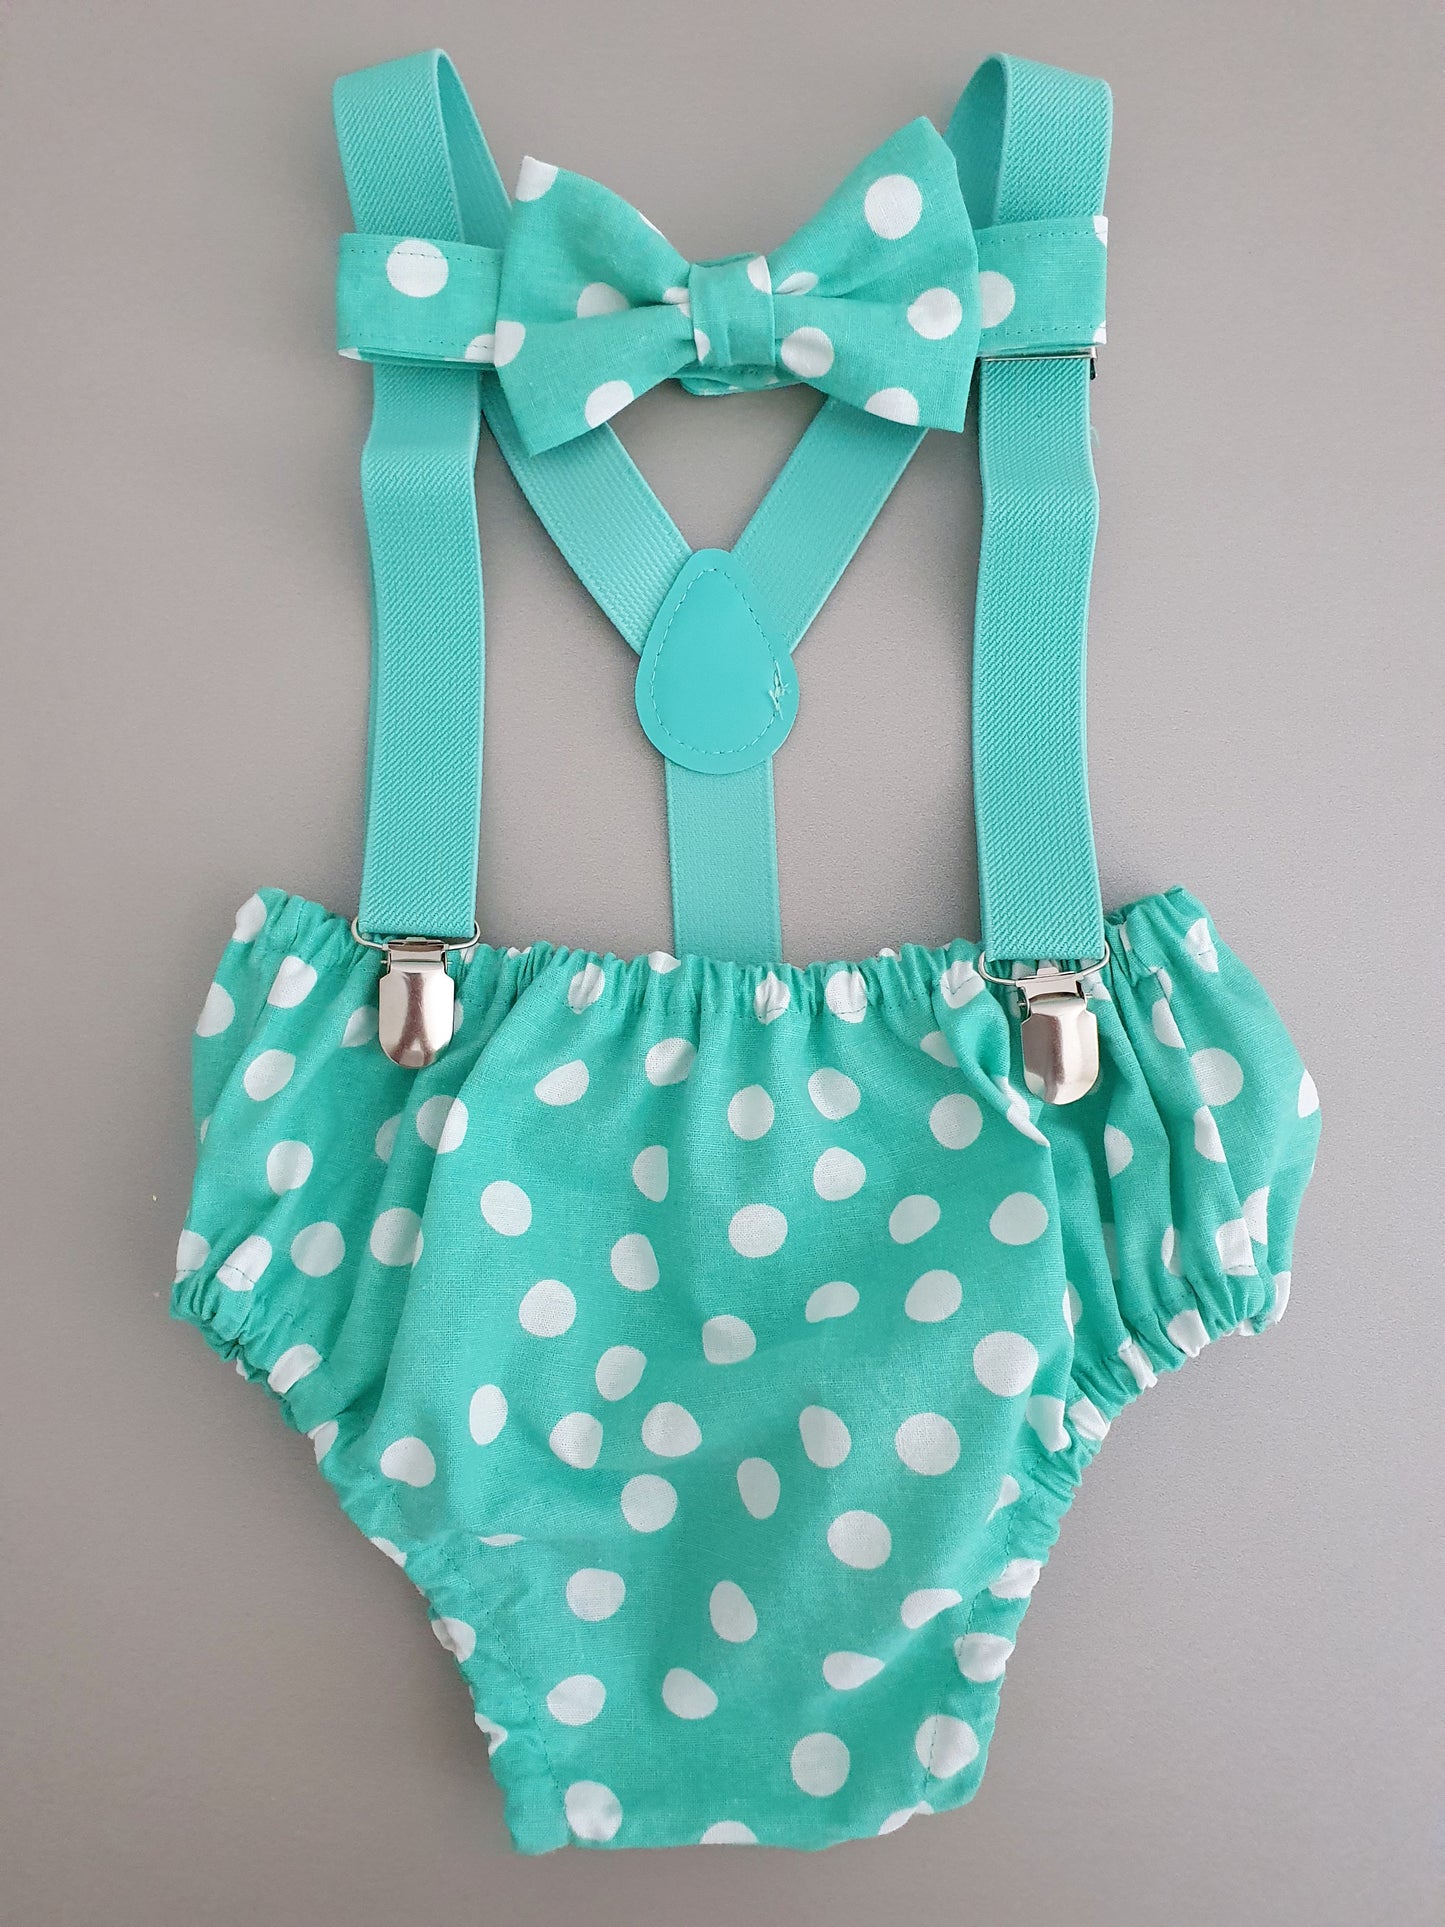 Boys Cake Smash Outfit, First Birthday Outfit, Size 0, 3 Piece Set - SPEARMINT